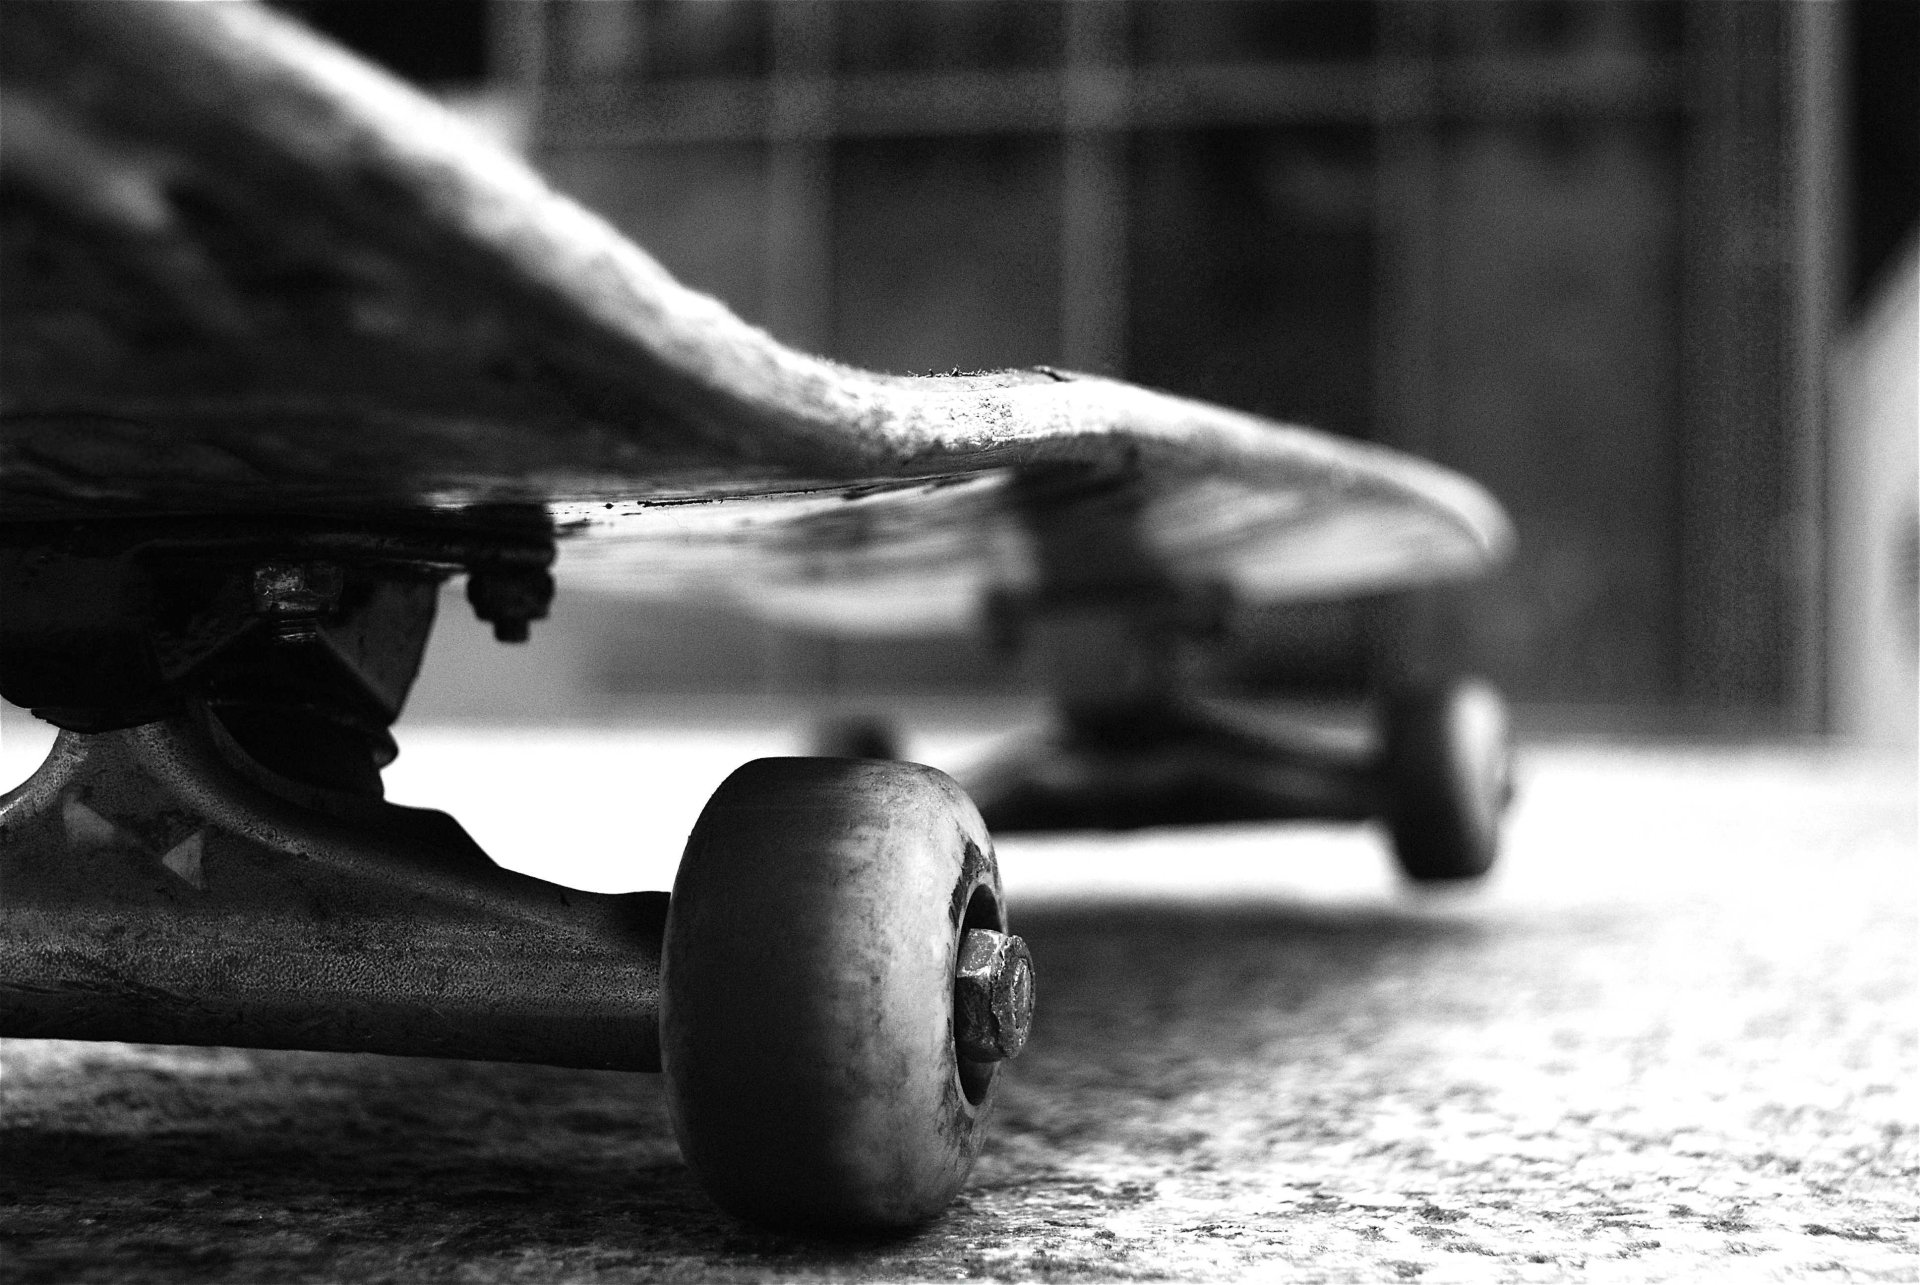 Wallpaper of Skateboard 74 pictures